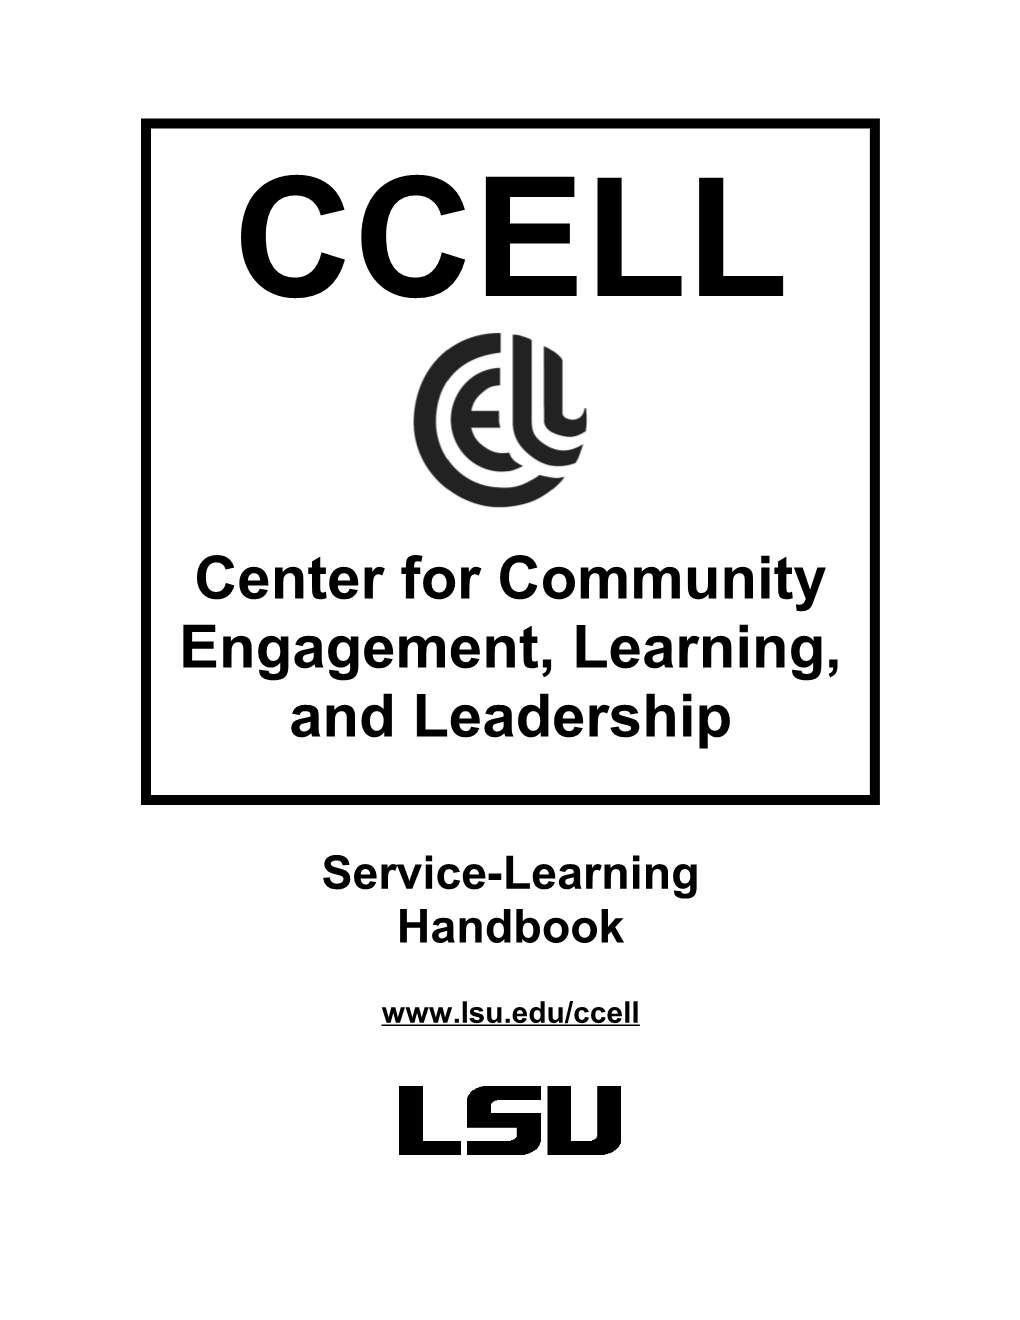 Center for Community Engagement, Learning, and Leadership